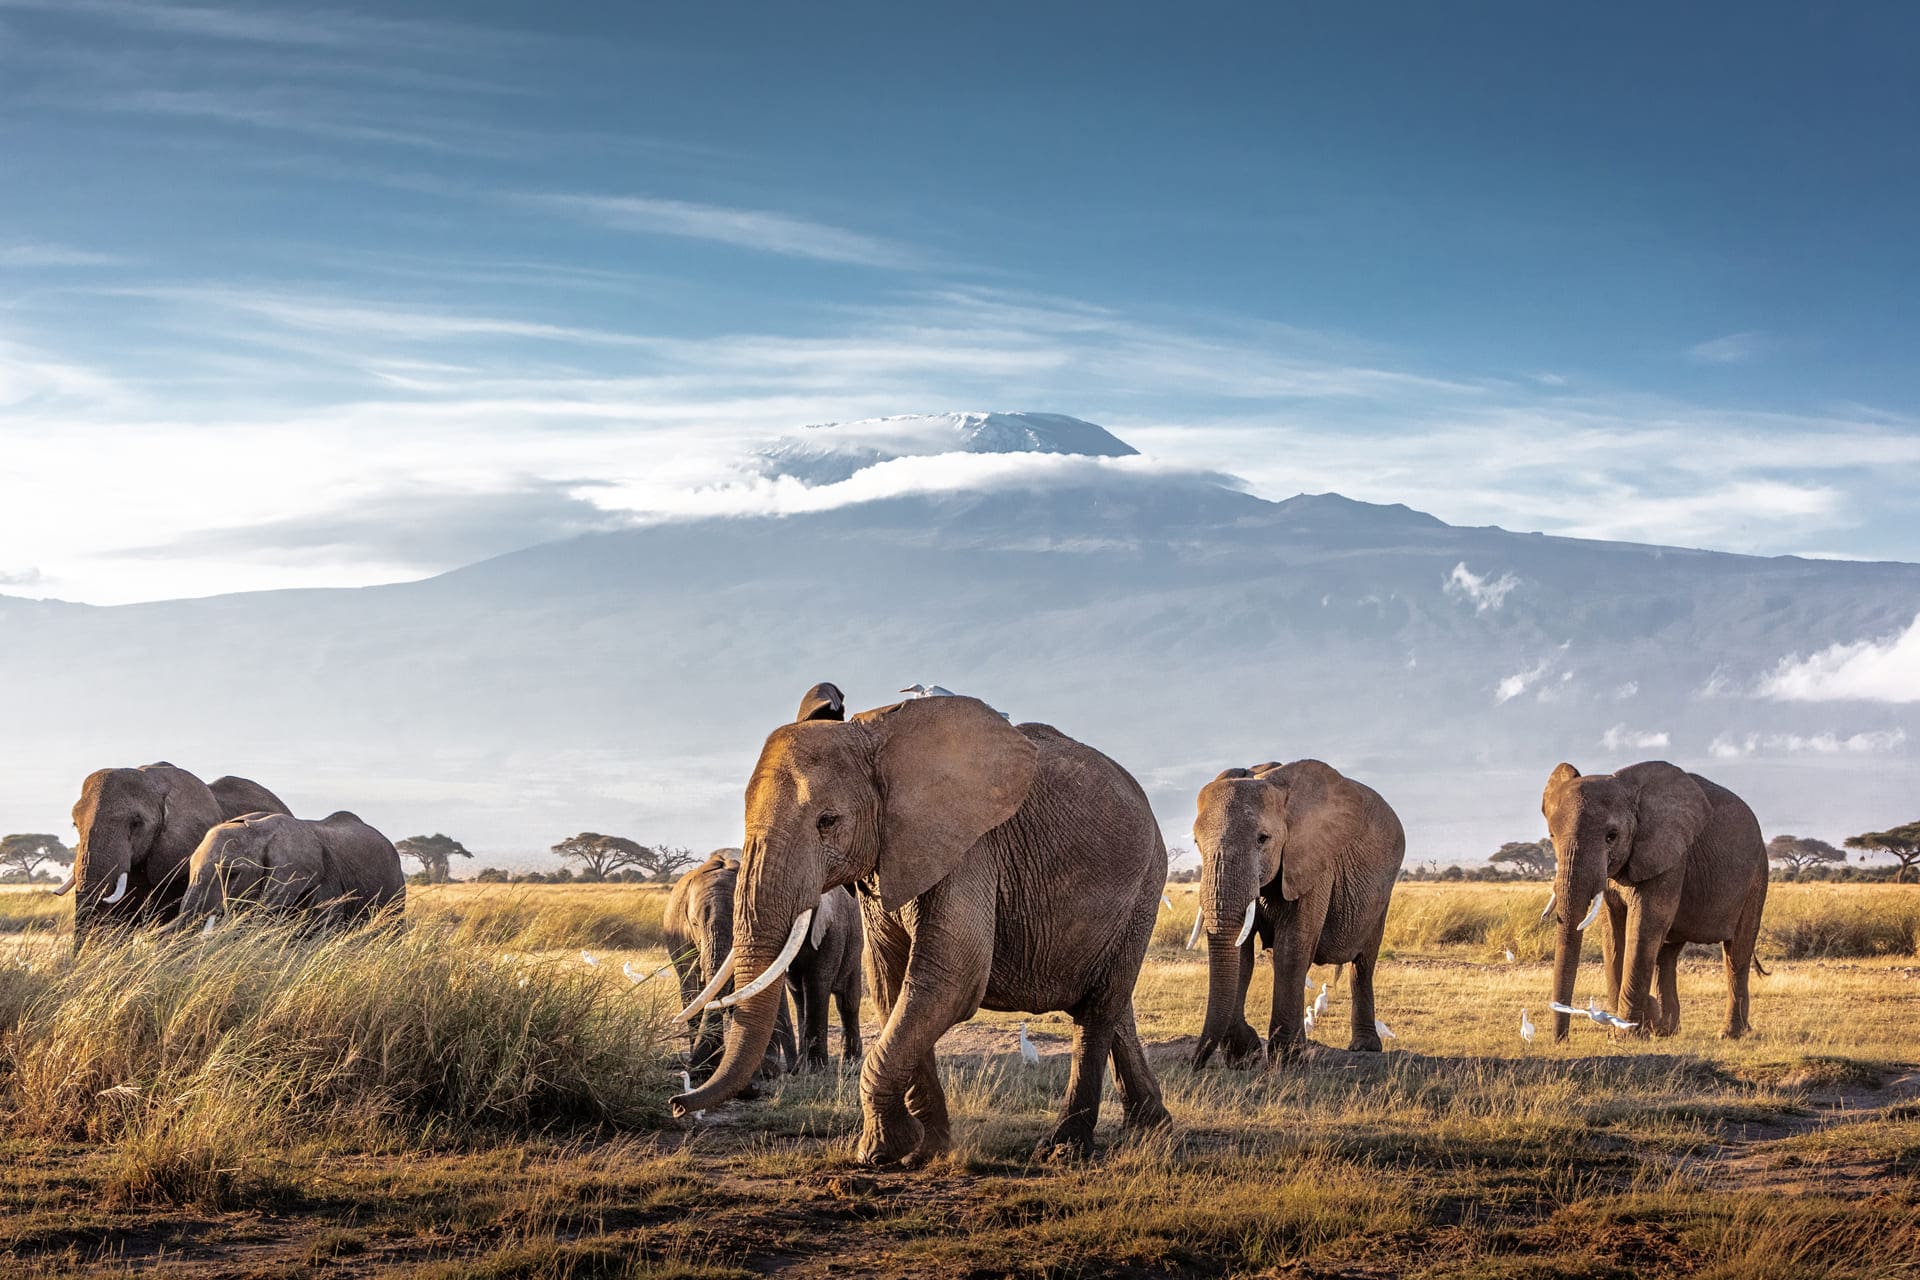 Herd of elephants with mountain in the background in Kenya